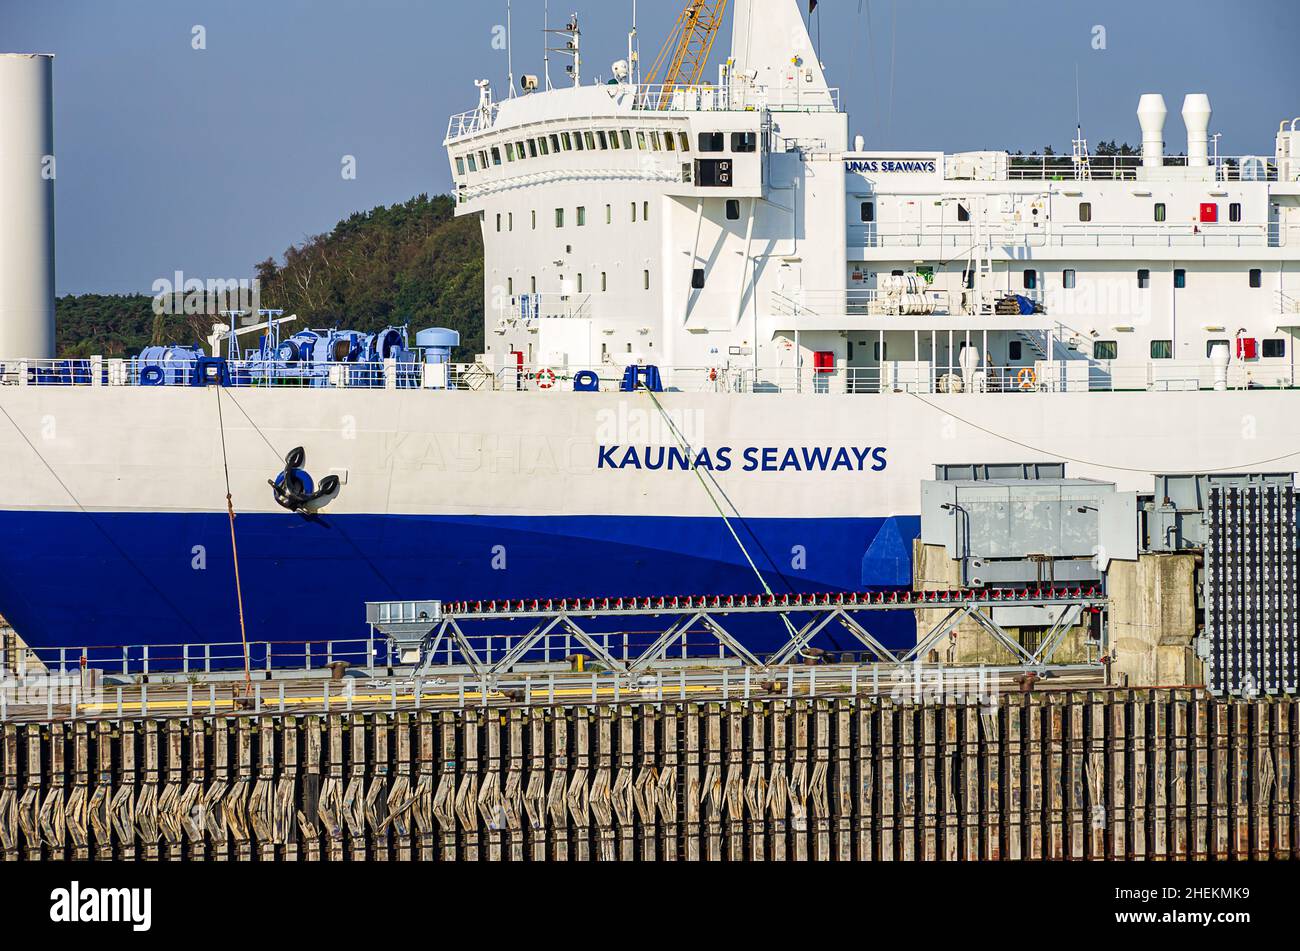 The KAUNAS SEAWAYS, a rail freight ferry, at the jetty in the ferry port of Sassnitz-Mukran, Mecklenburg-Western Pomerania, Germany, August 9, 2014. Stock Photo